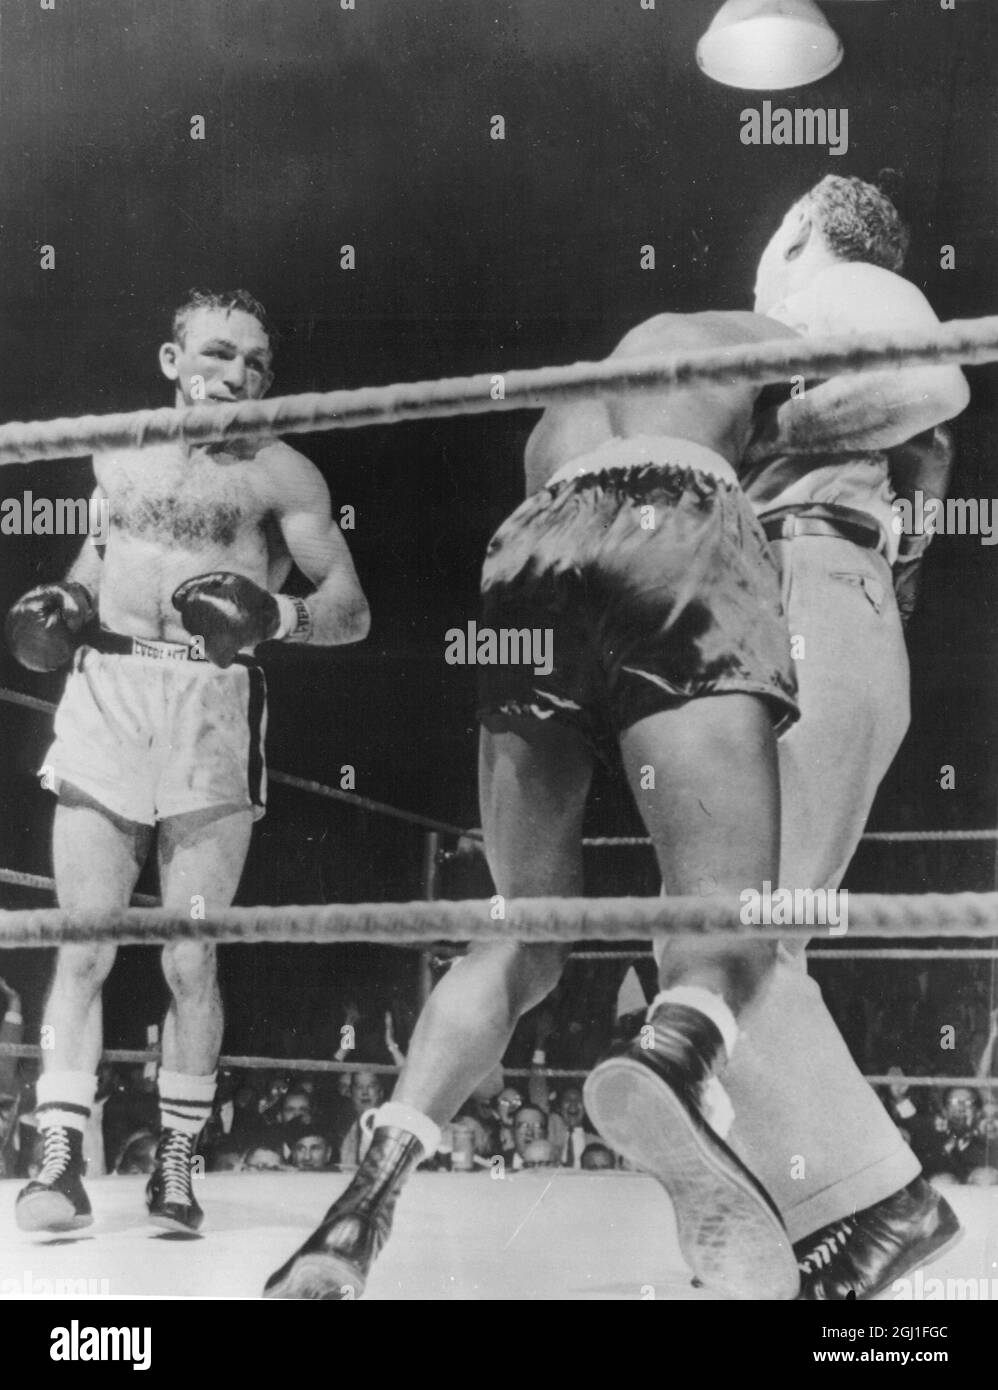 Dazed and battered welterweight champion Johnny Saxton is pulled up by referee Al Berl during fight with Carmen Basilio during Welterweight Championship 1956 Stock Photo